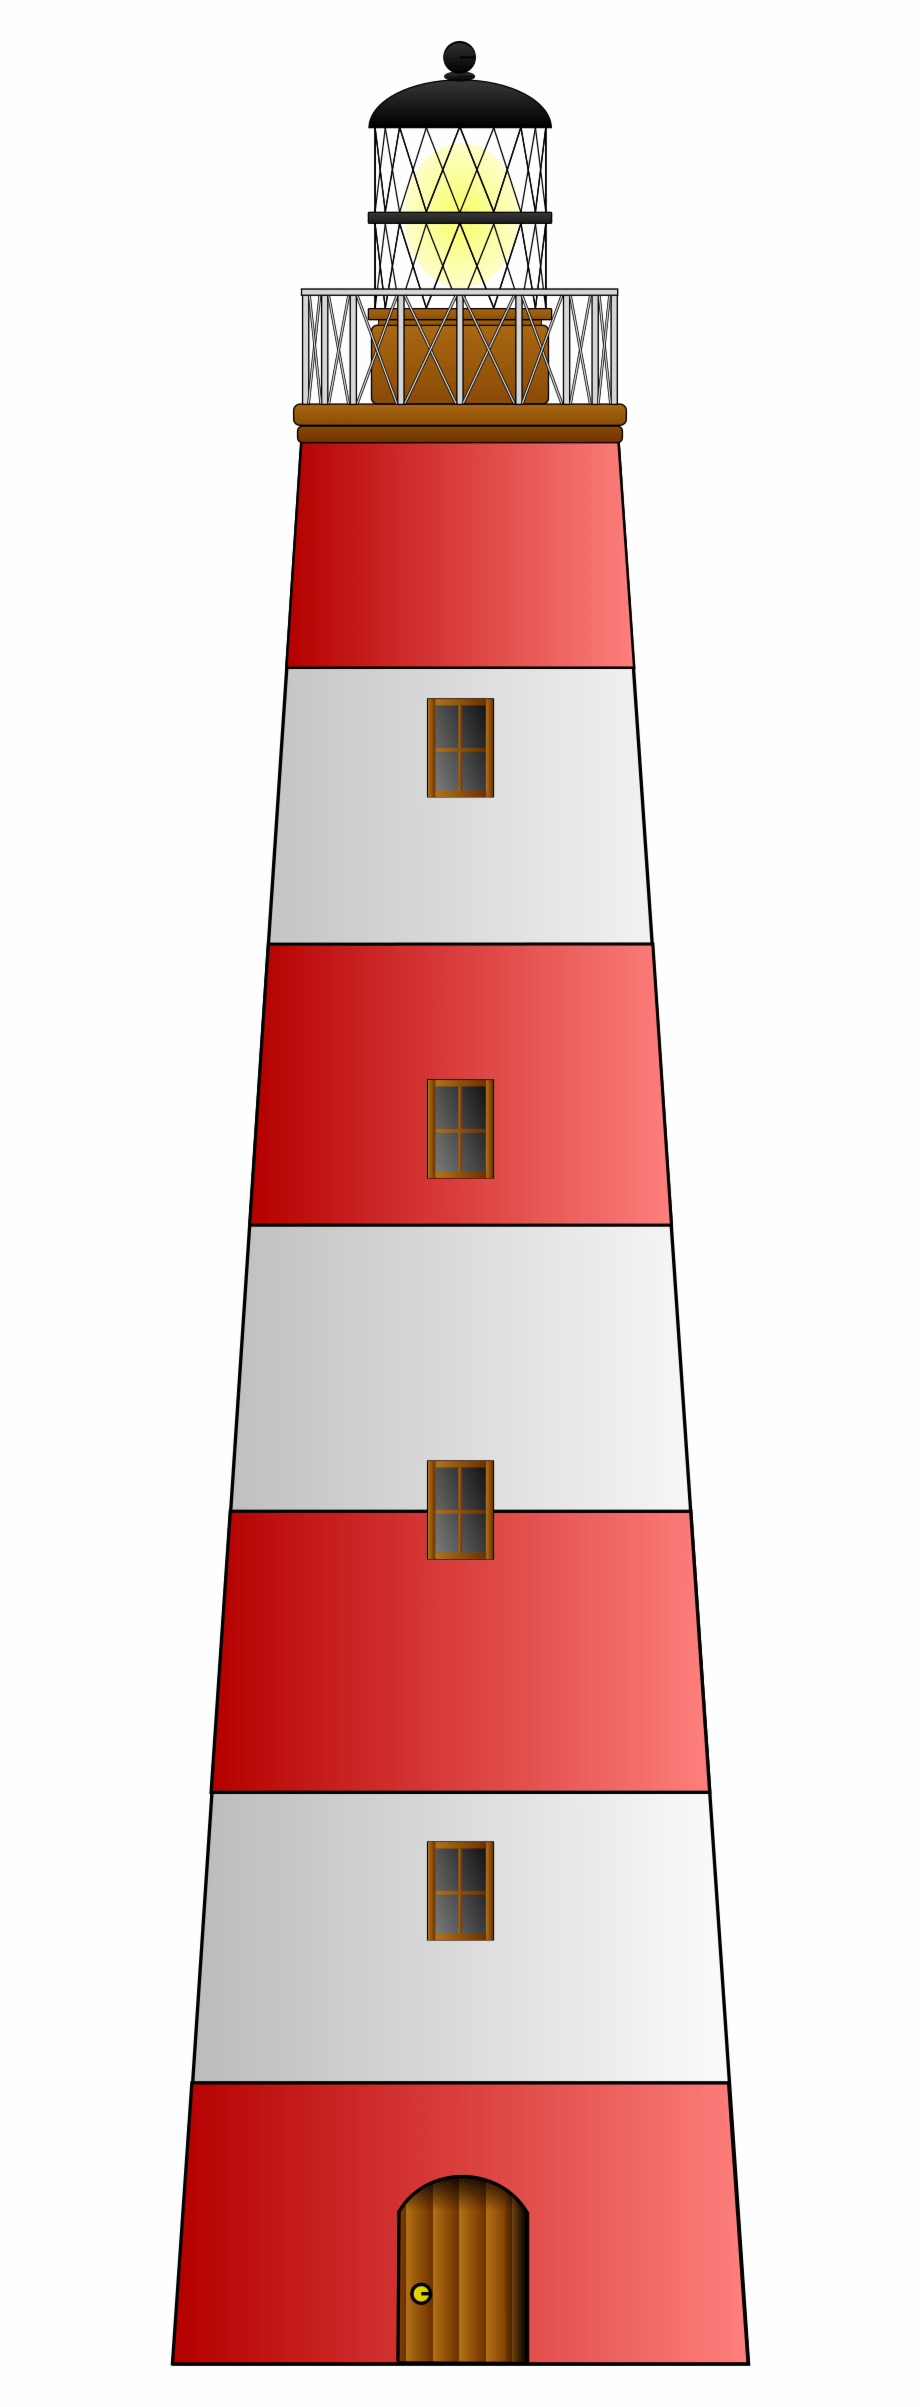 Download transparent png . Lighthouse clipart red and white